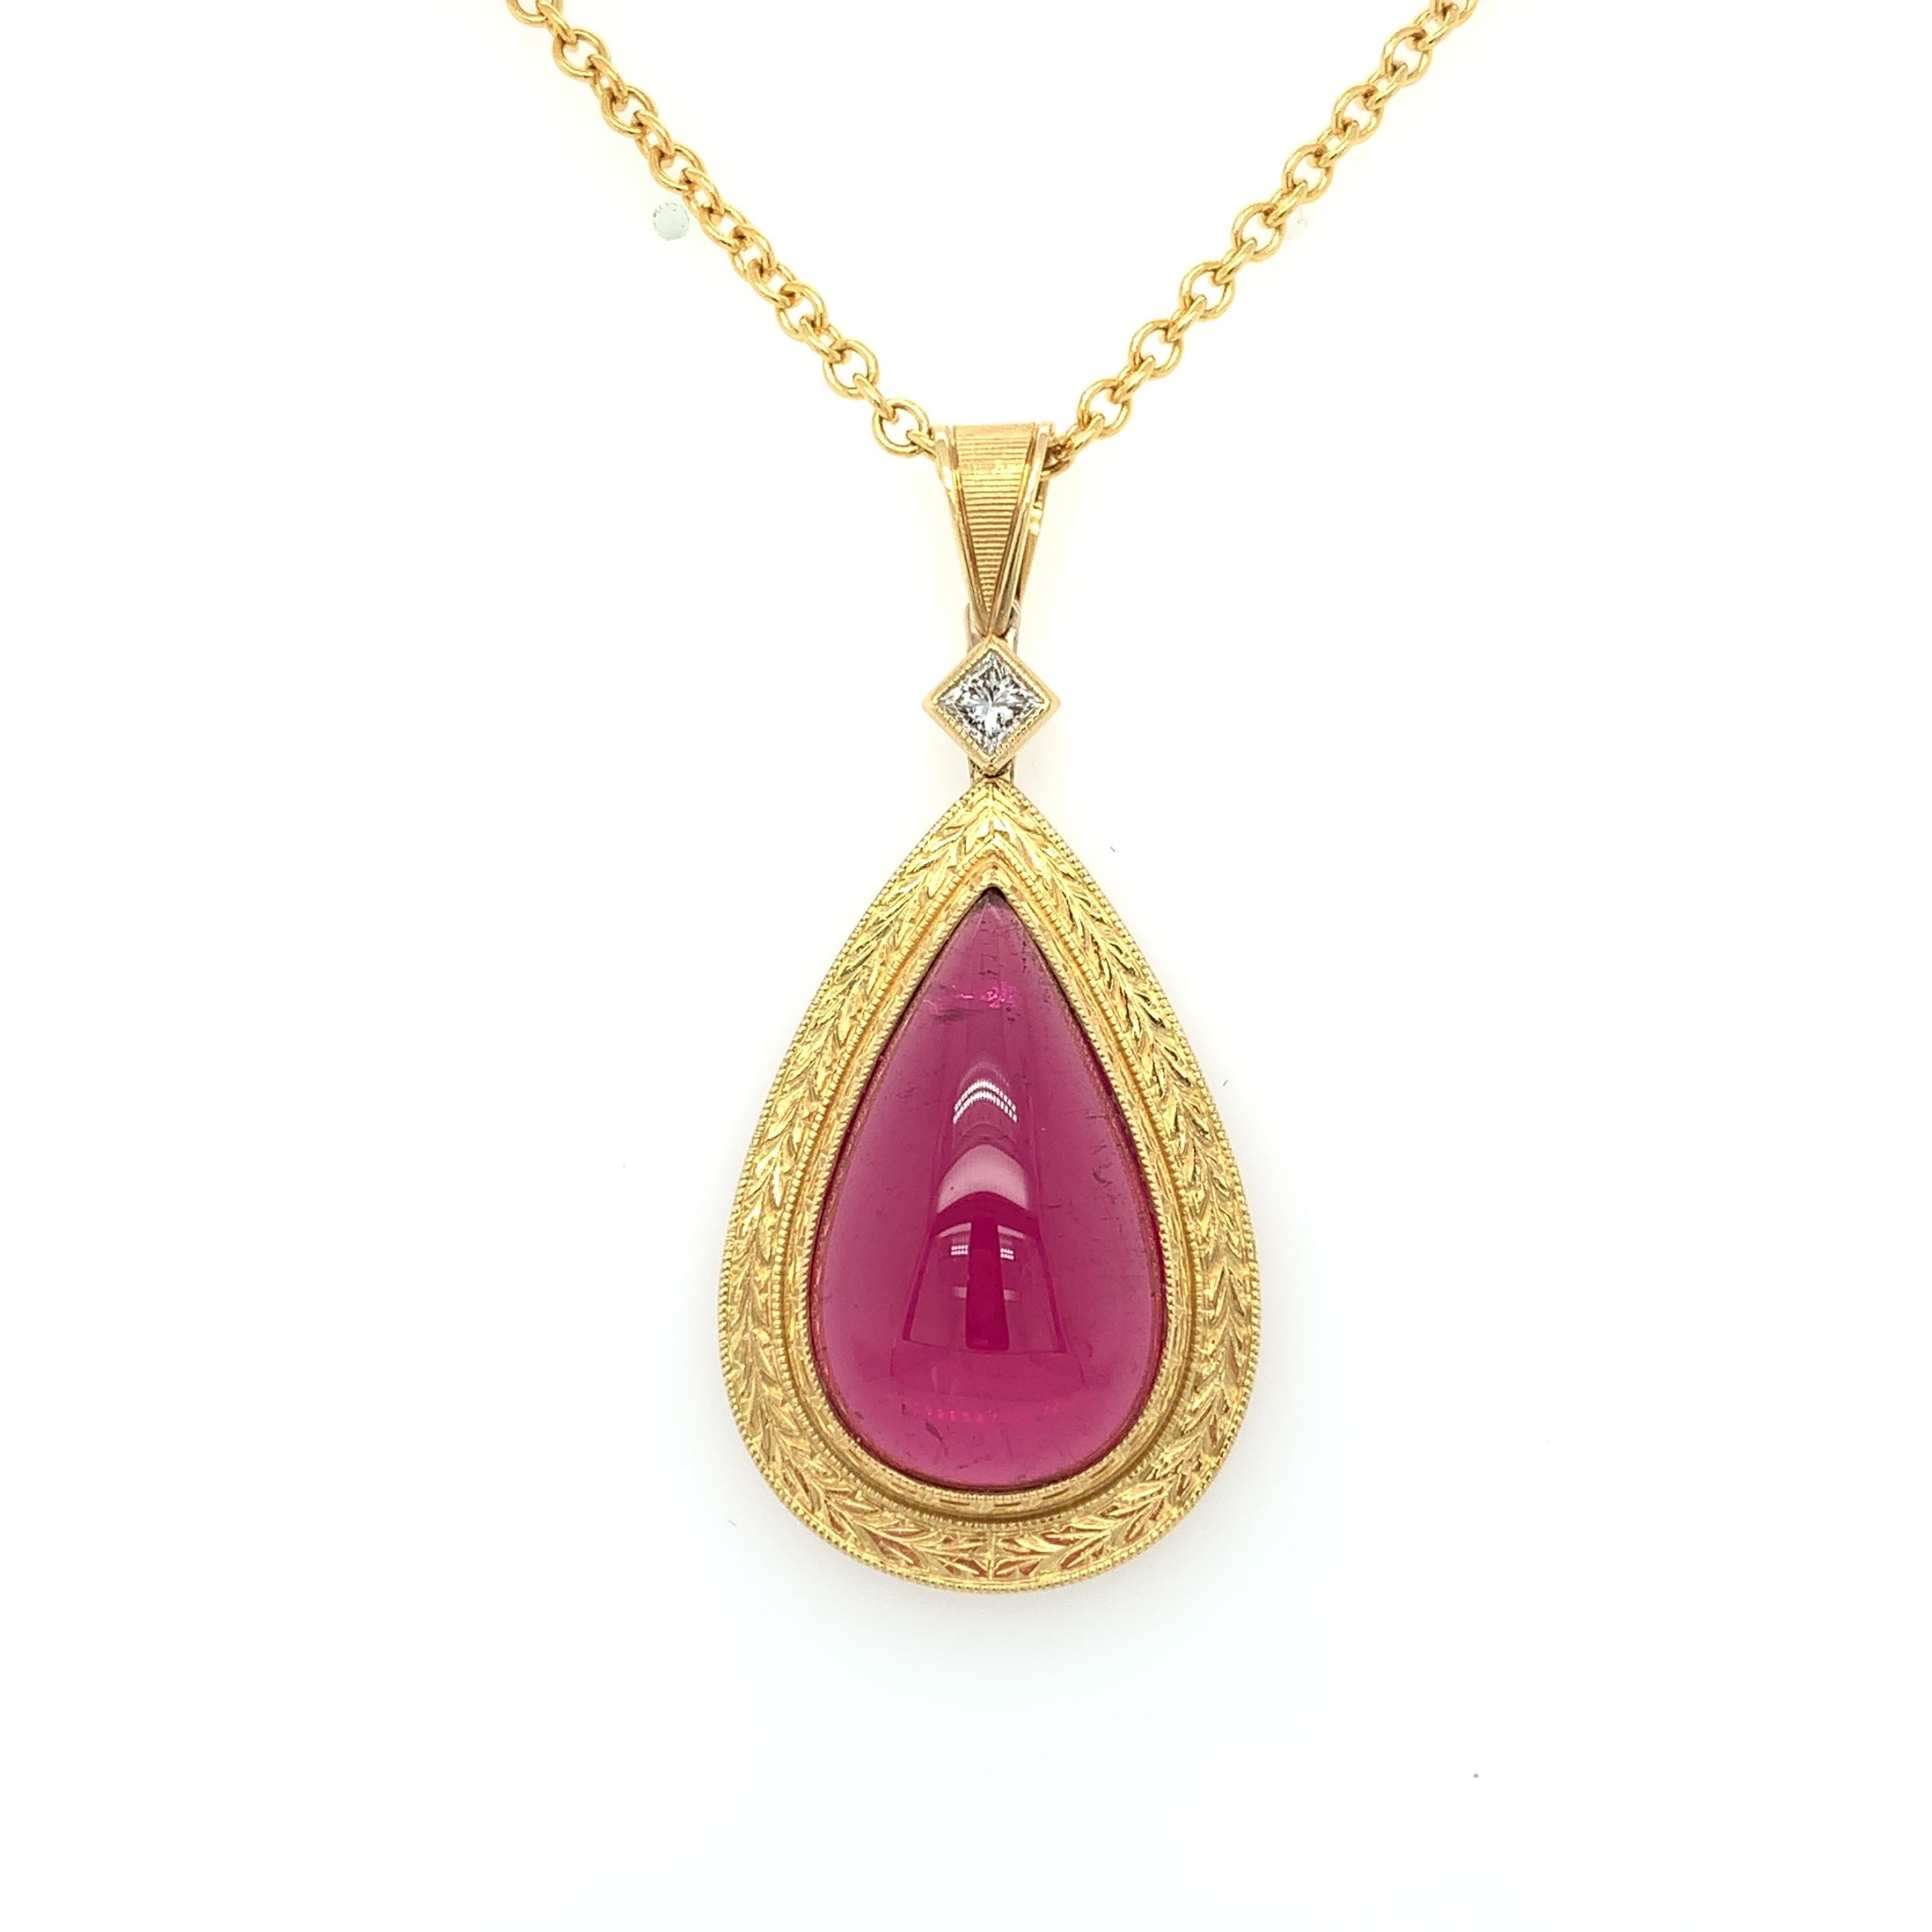 This fuchsia-red tourmaline pendant features a large, 17.75 carat gem-quality pear-shaped rubellite cabochon and is the definition of a statement piece! It is beautifully set in a hand-engraved yellow gold bezel, suspended from a sparkling princess